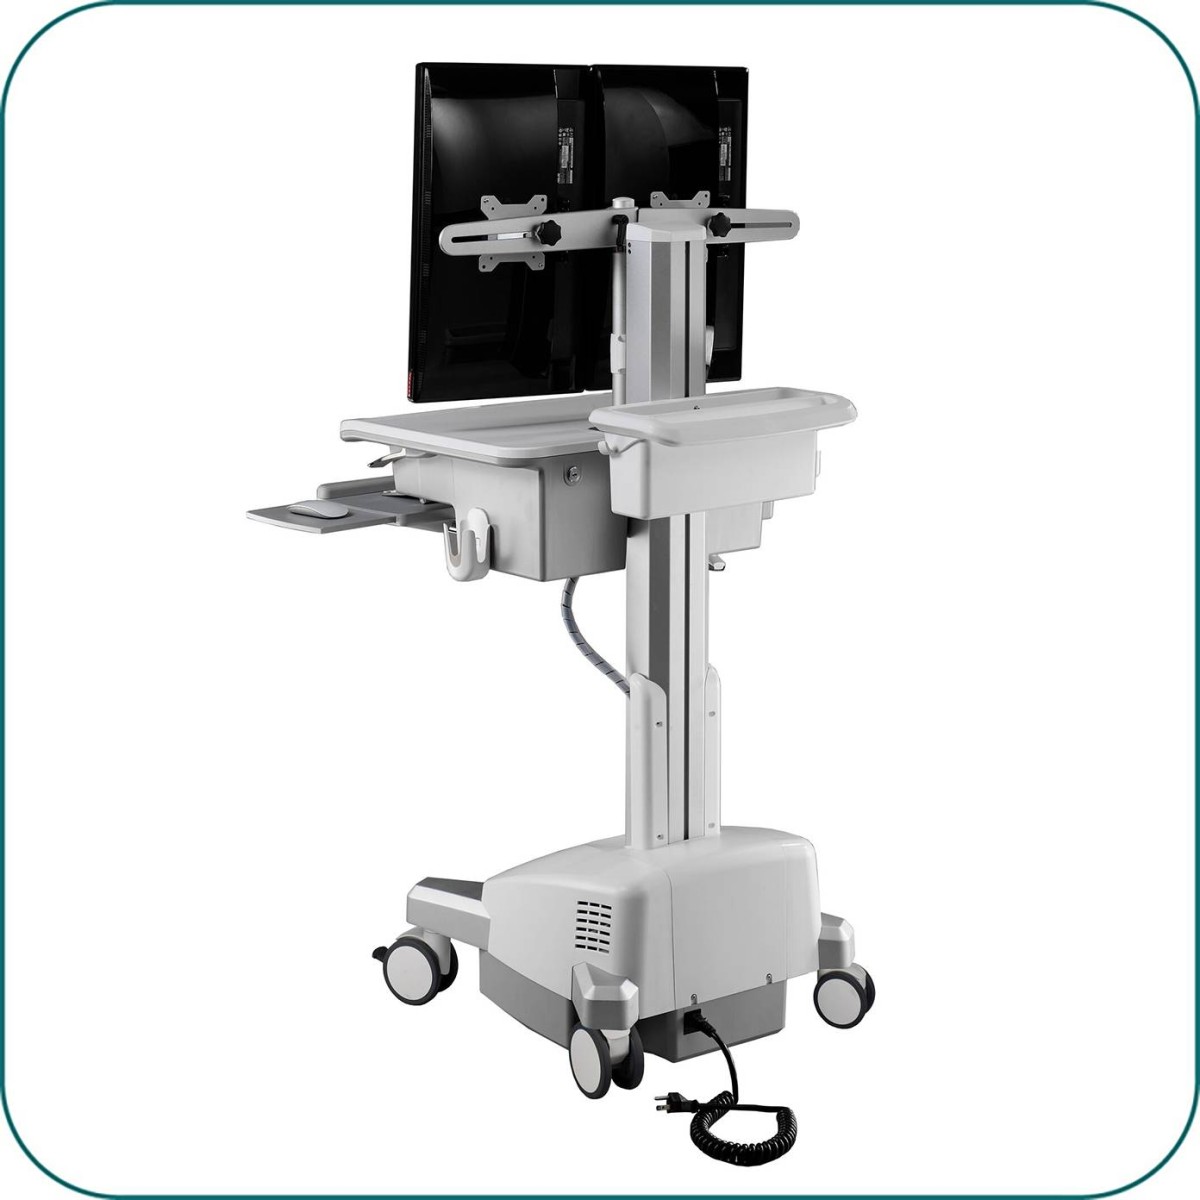 Aavara CMD01 Powered Mobile Medical Cart with Manual LIFT - Dual Monitor type